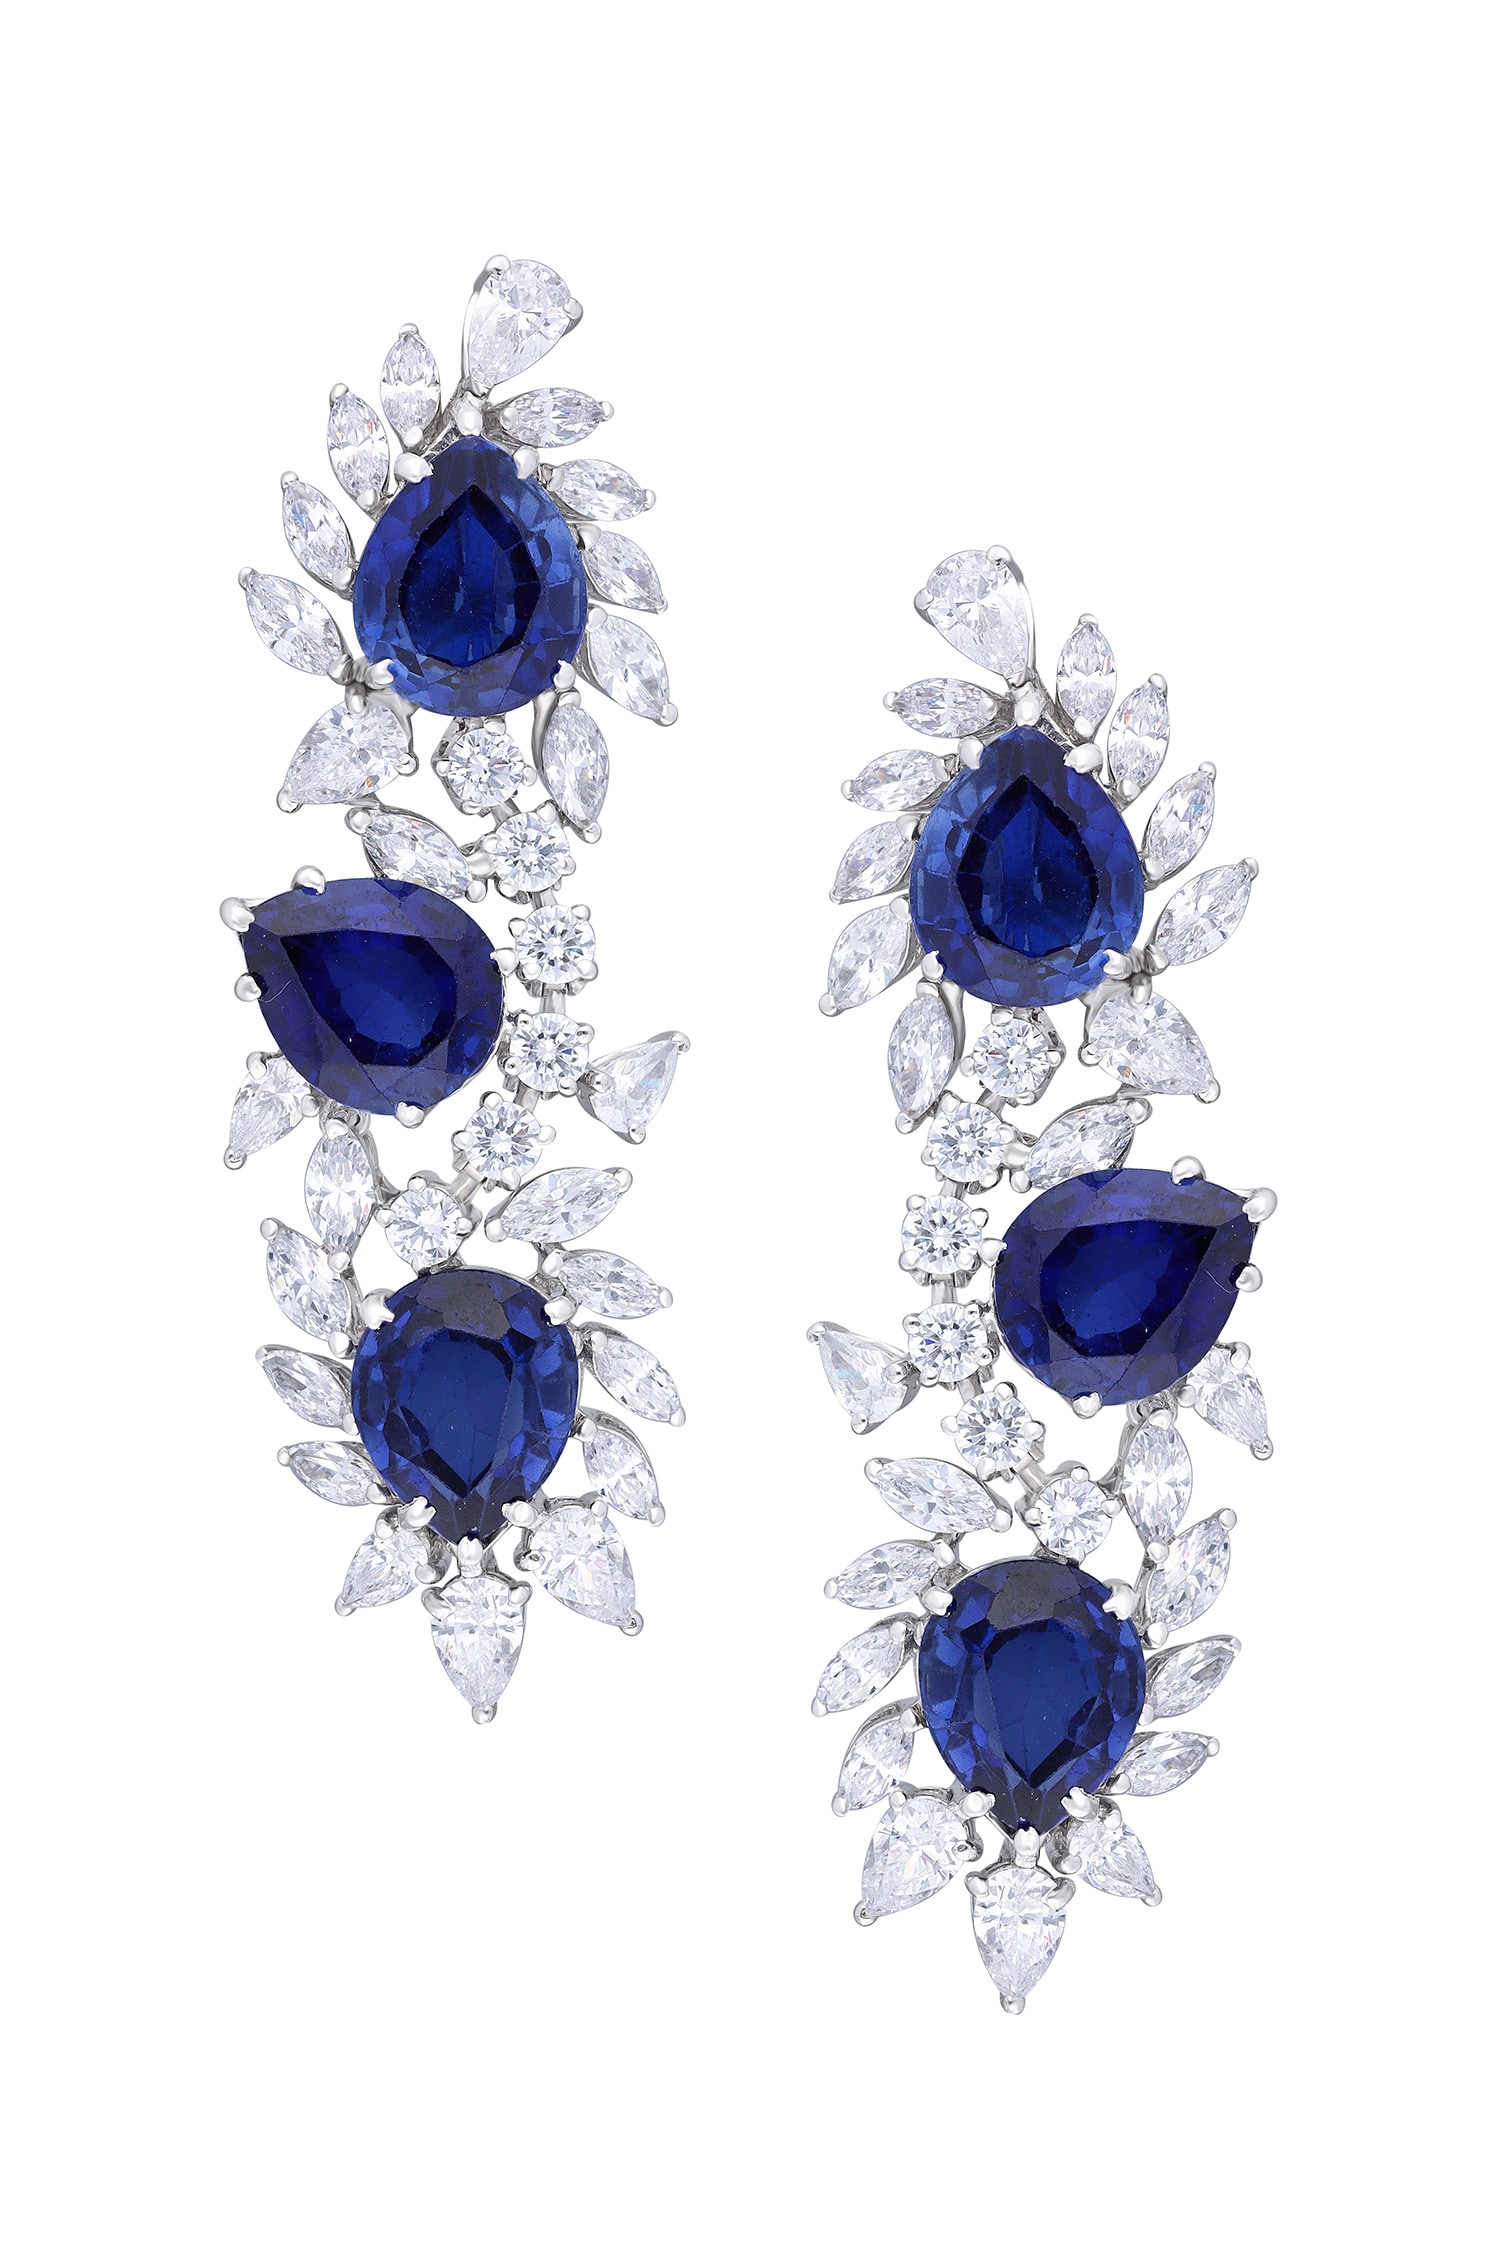 Azure Gold Diamond and Blue Sapphire Stud Earrings  MOI  Boutique  Everyday Luxury